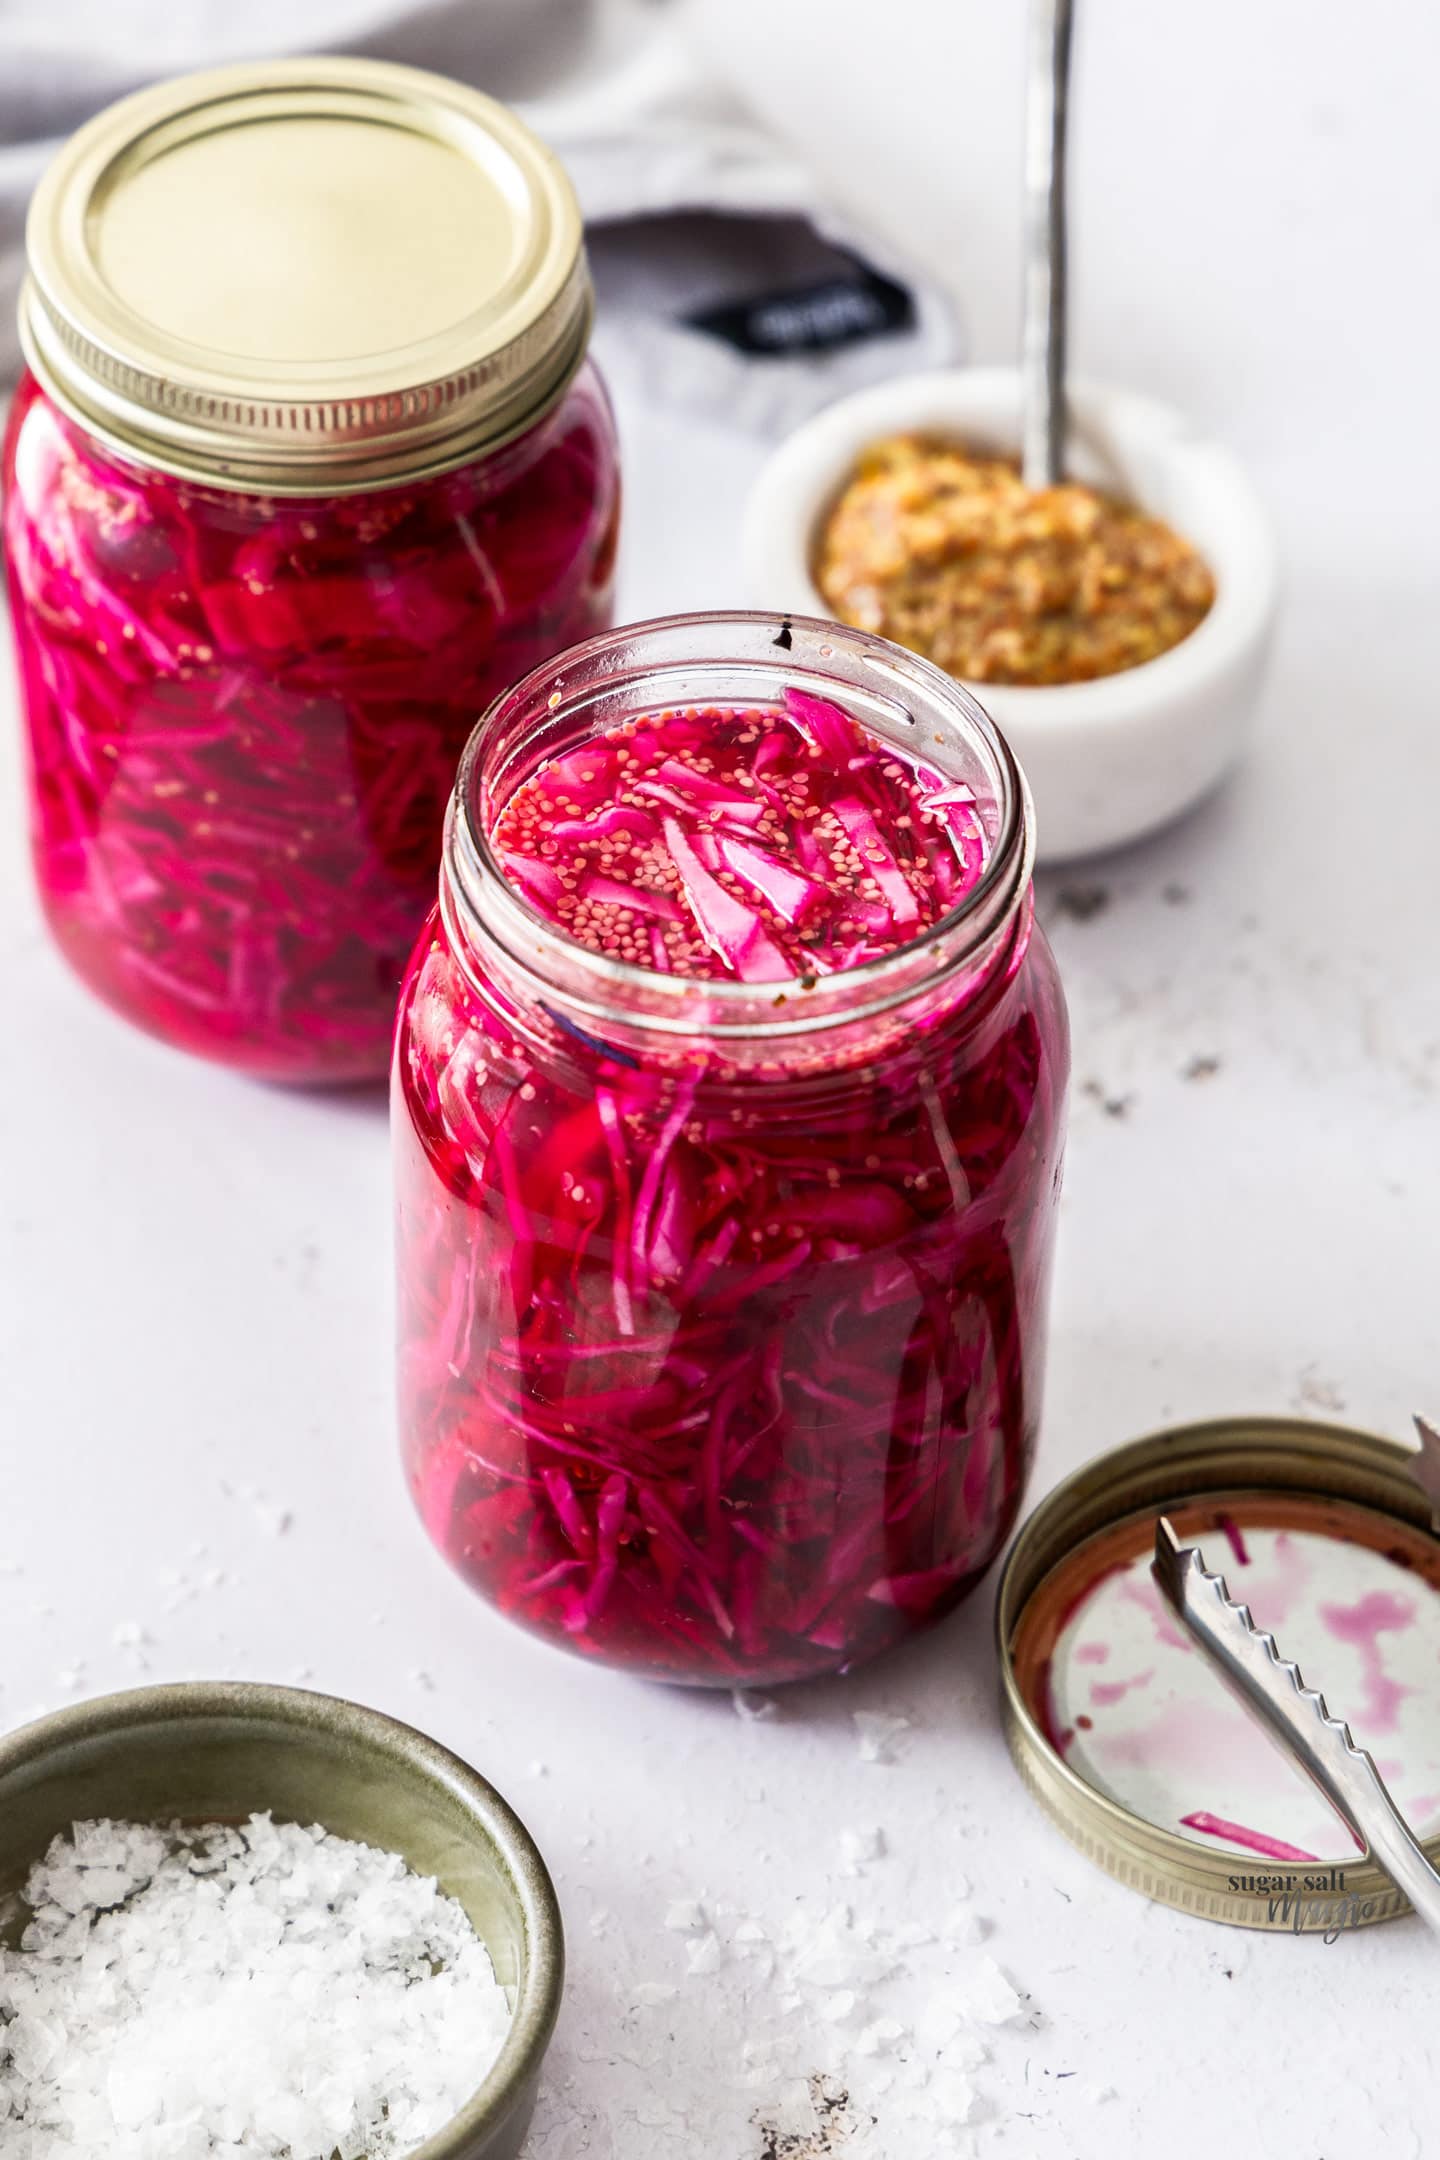 Looking down at pickled red cabbage in a jar.